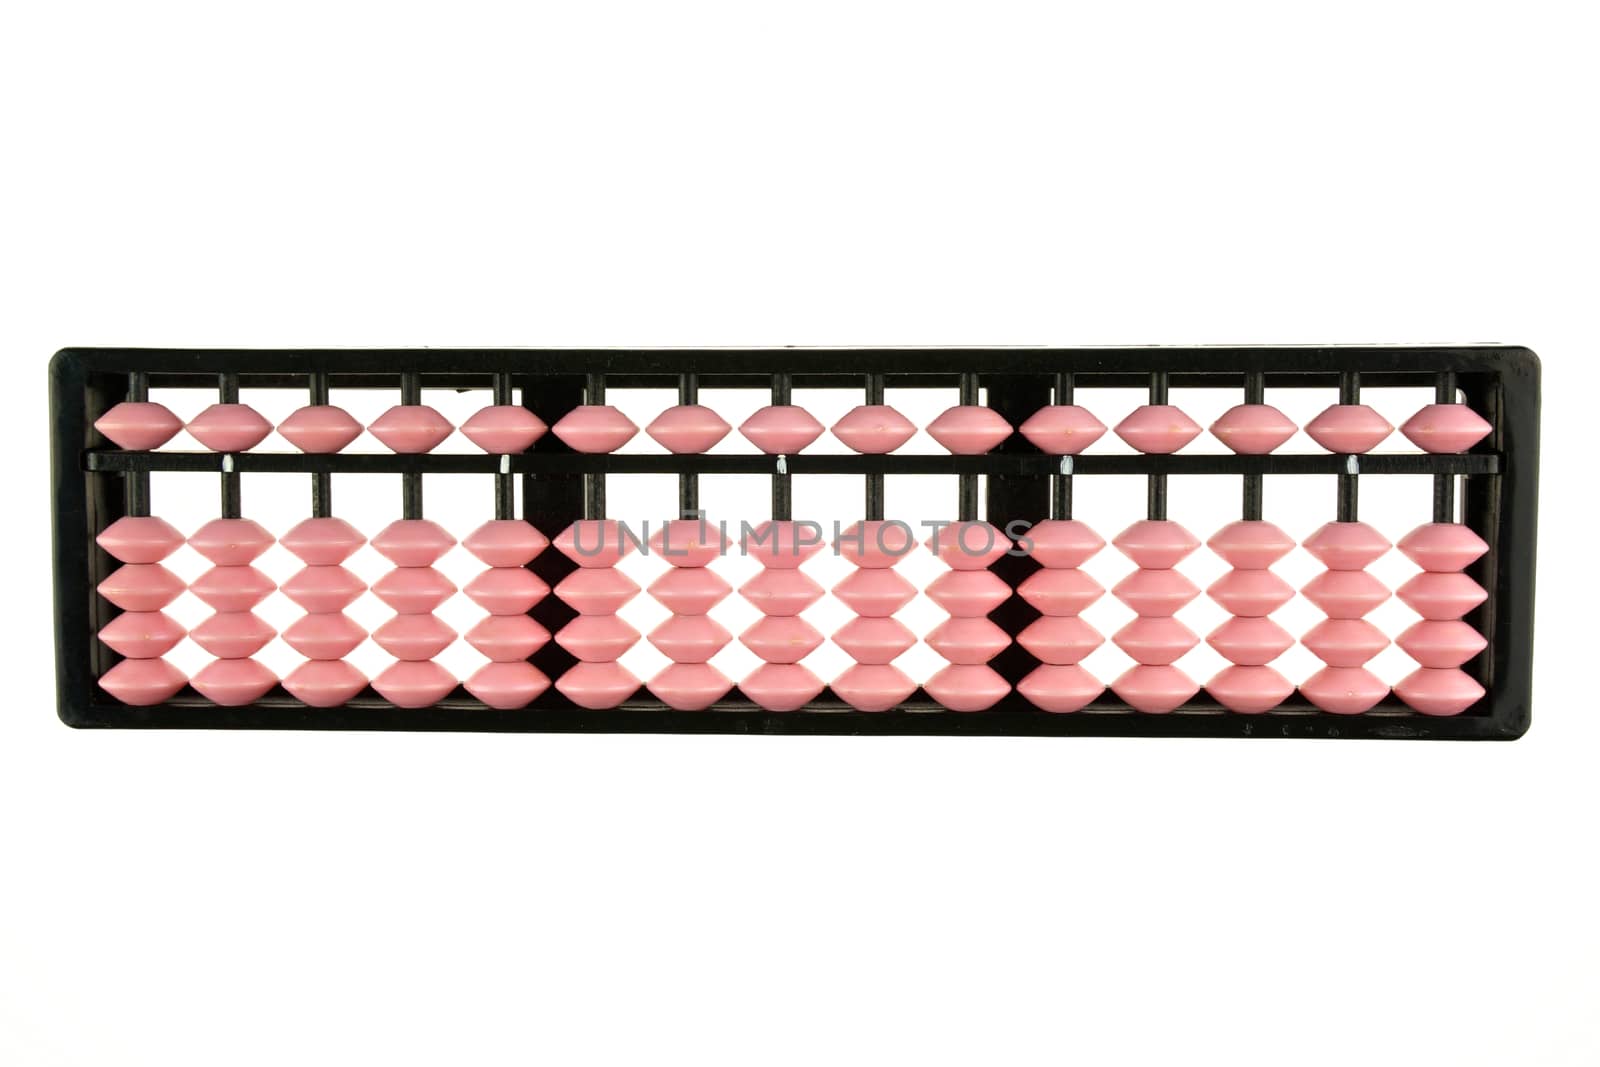 Pink and black abacus retro japan calculator isolated with white background.